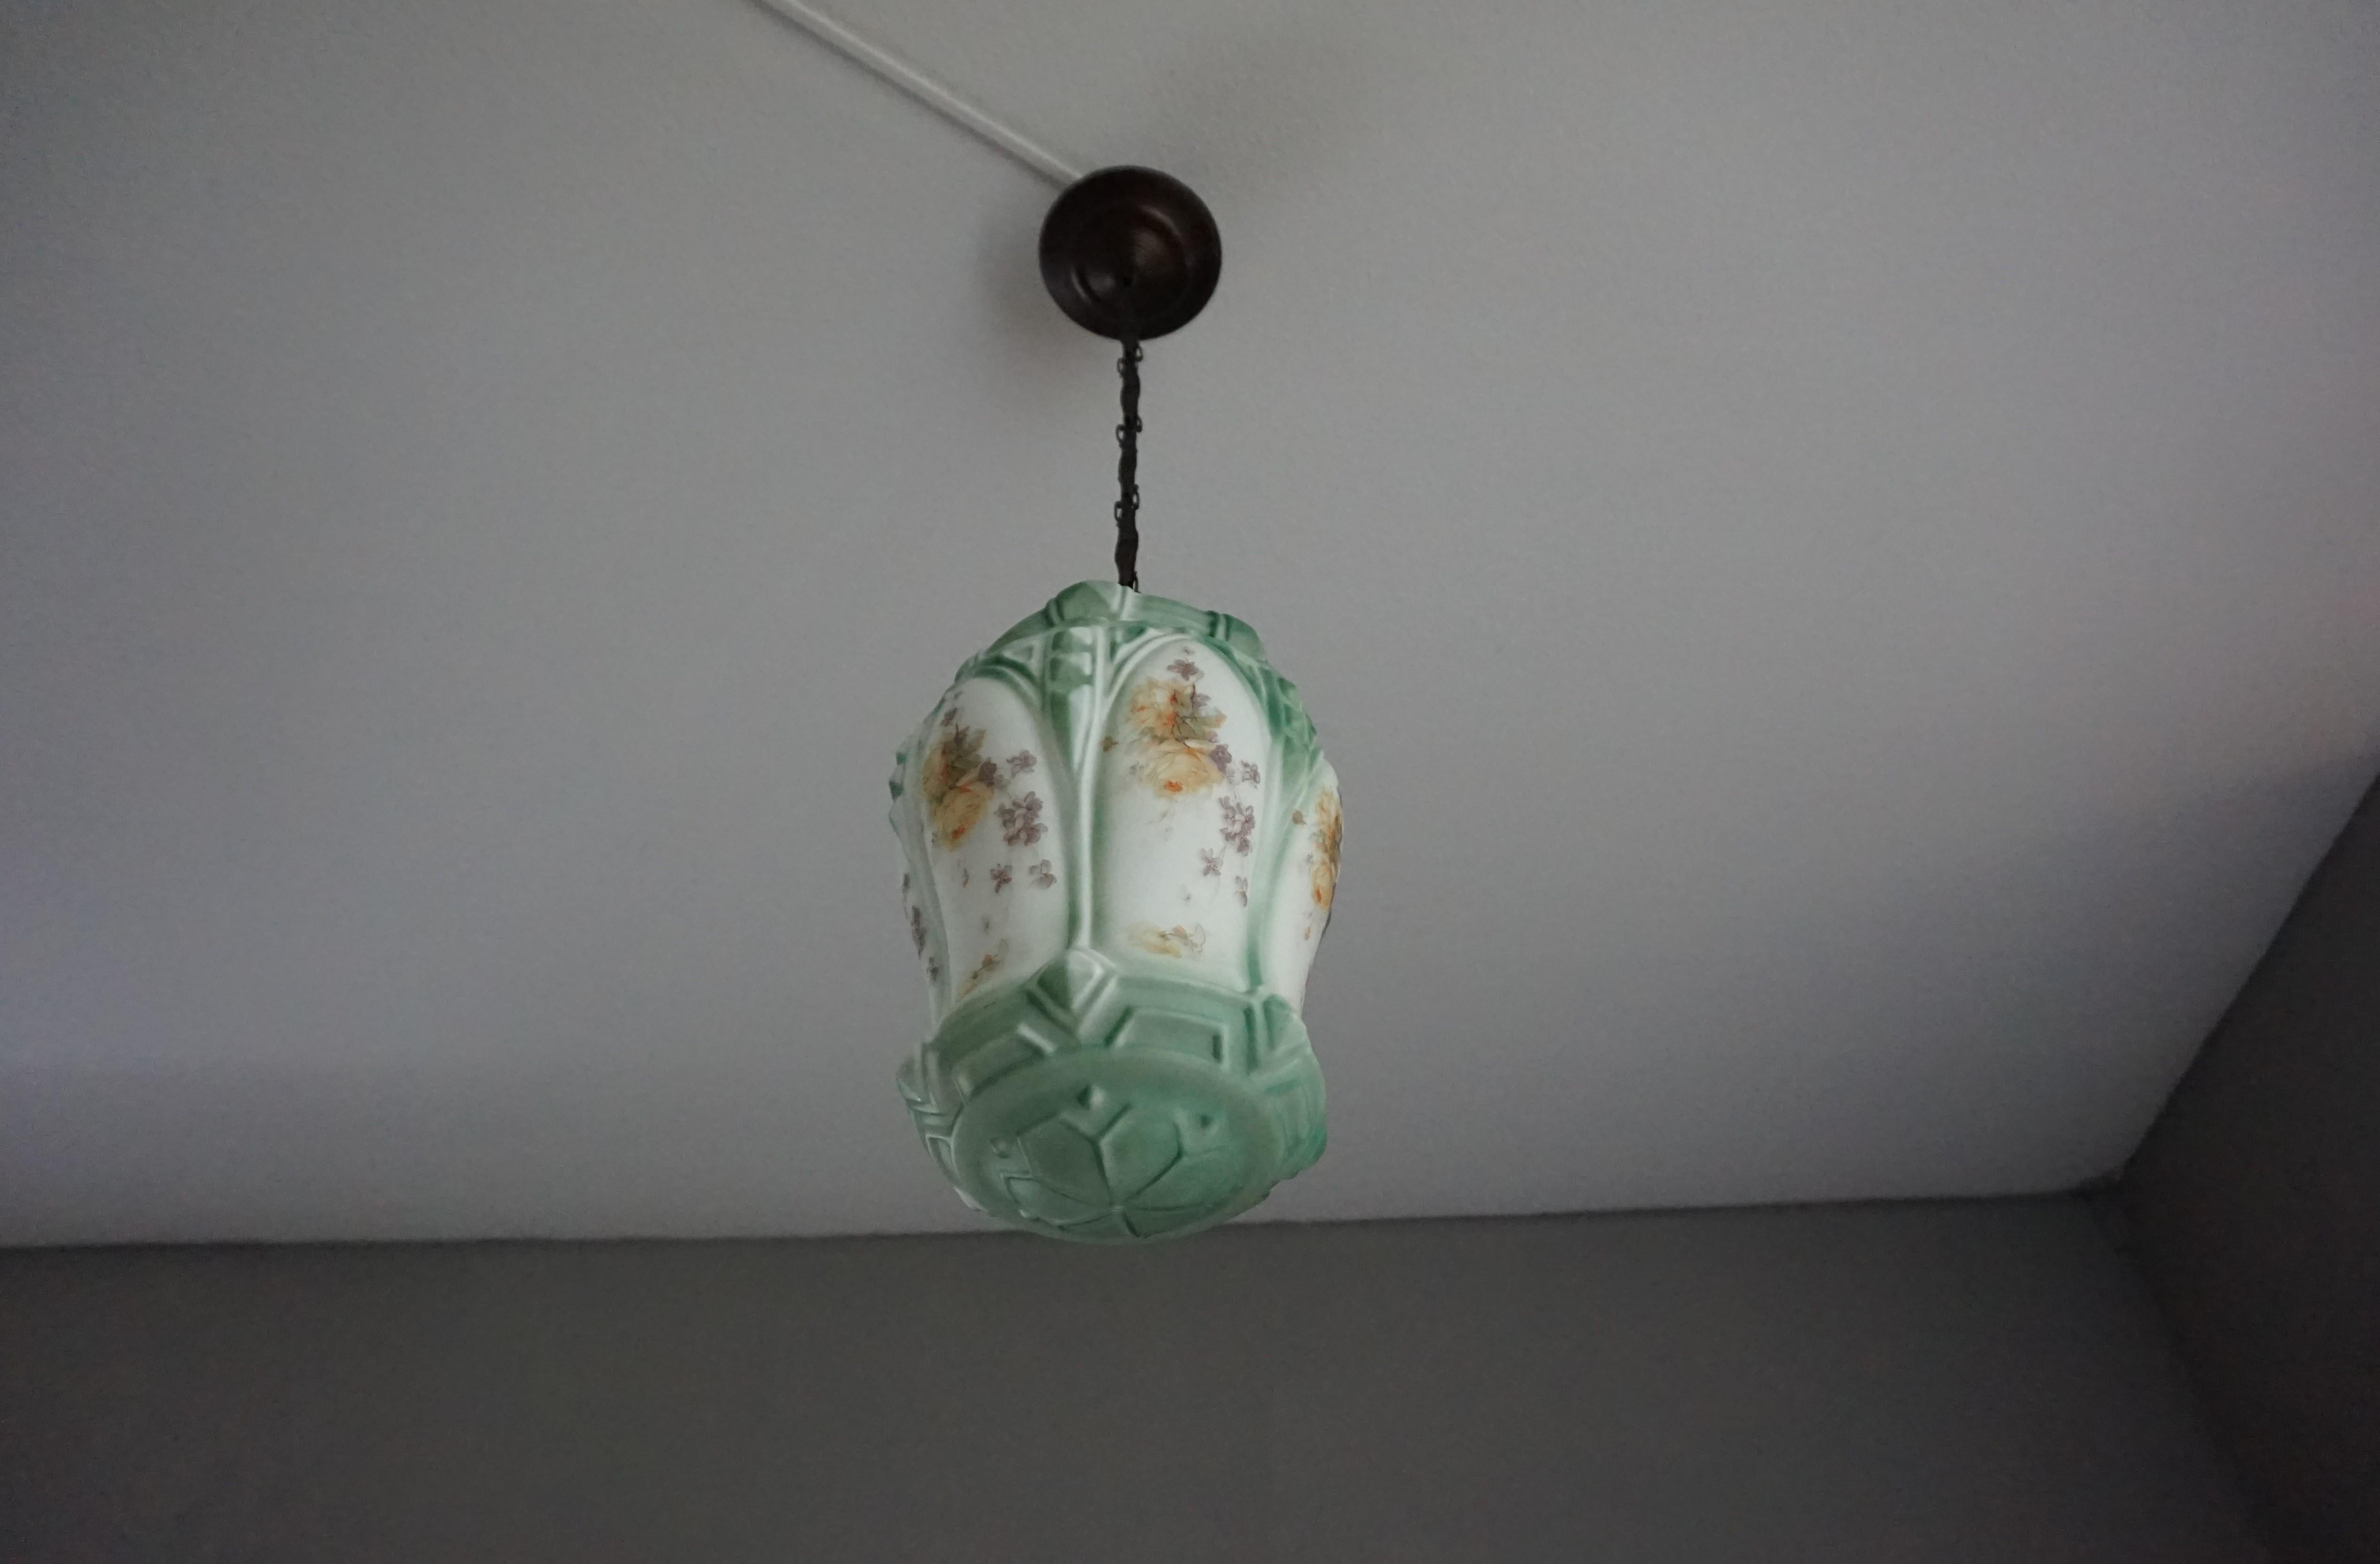 Beautiful shape, colorful and excellent condition chandelier.

If you are looking for a rare and decorative light fixture that is stylish and quality-made at the same time then this fine pendant could be flying your way soon. This all-original and